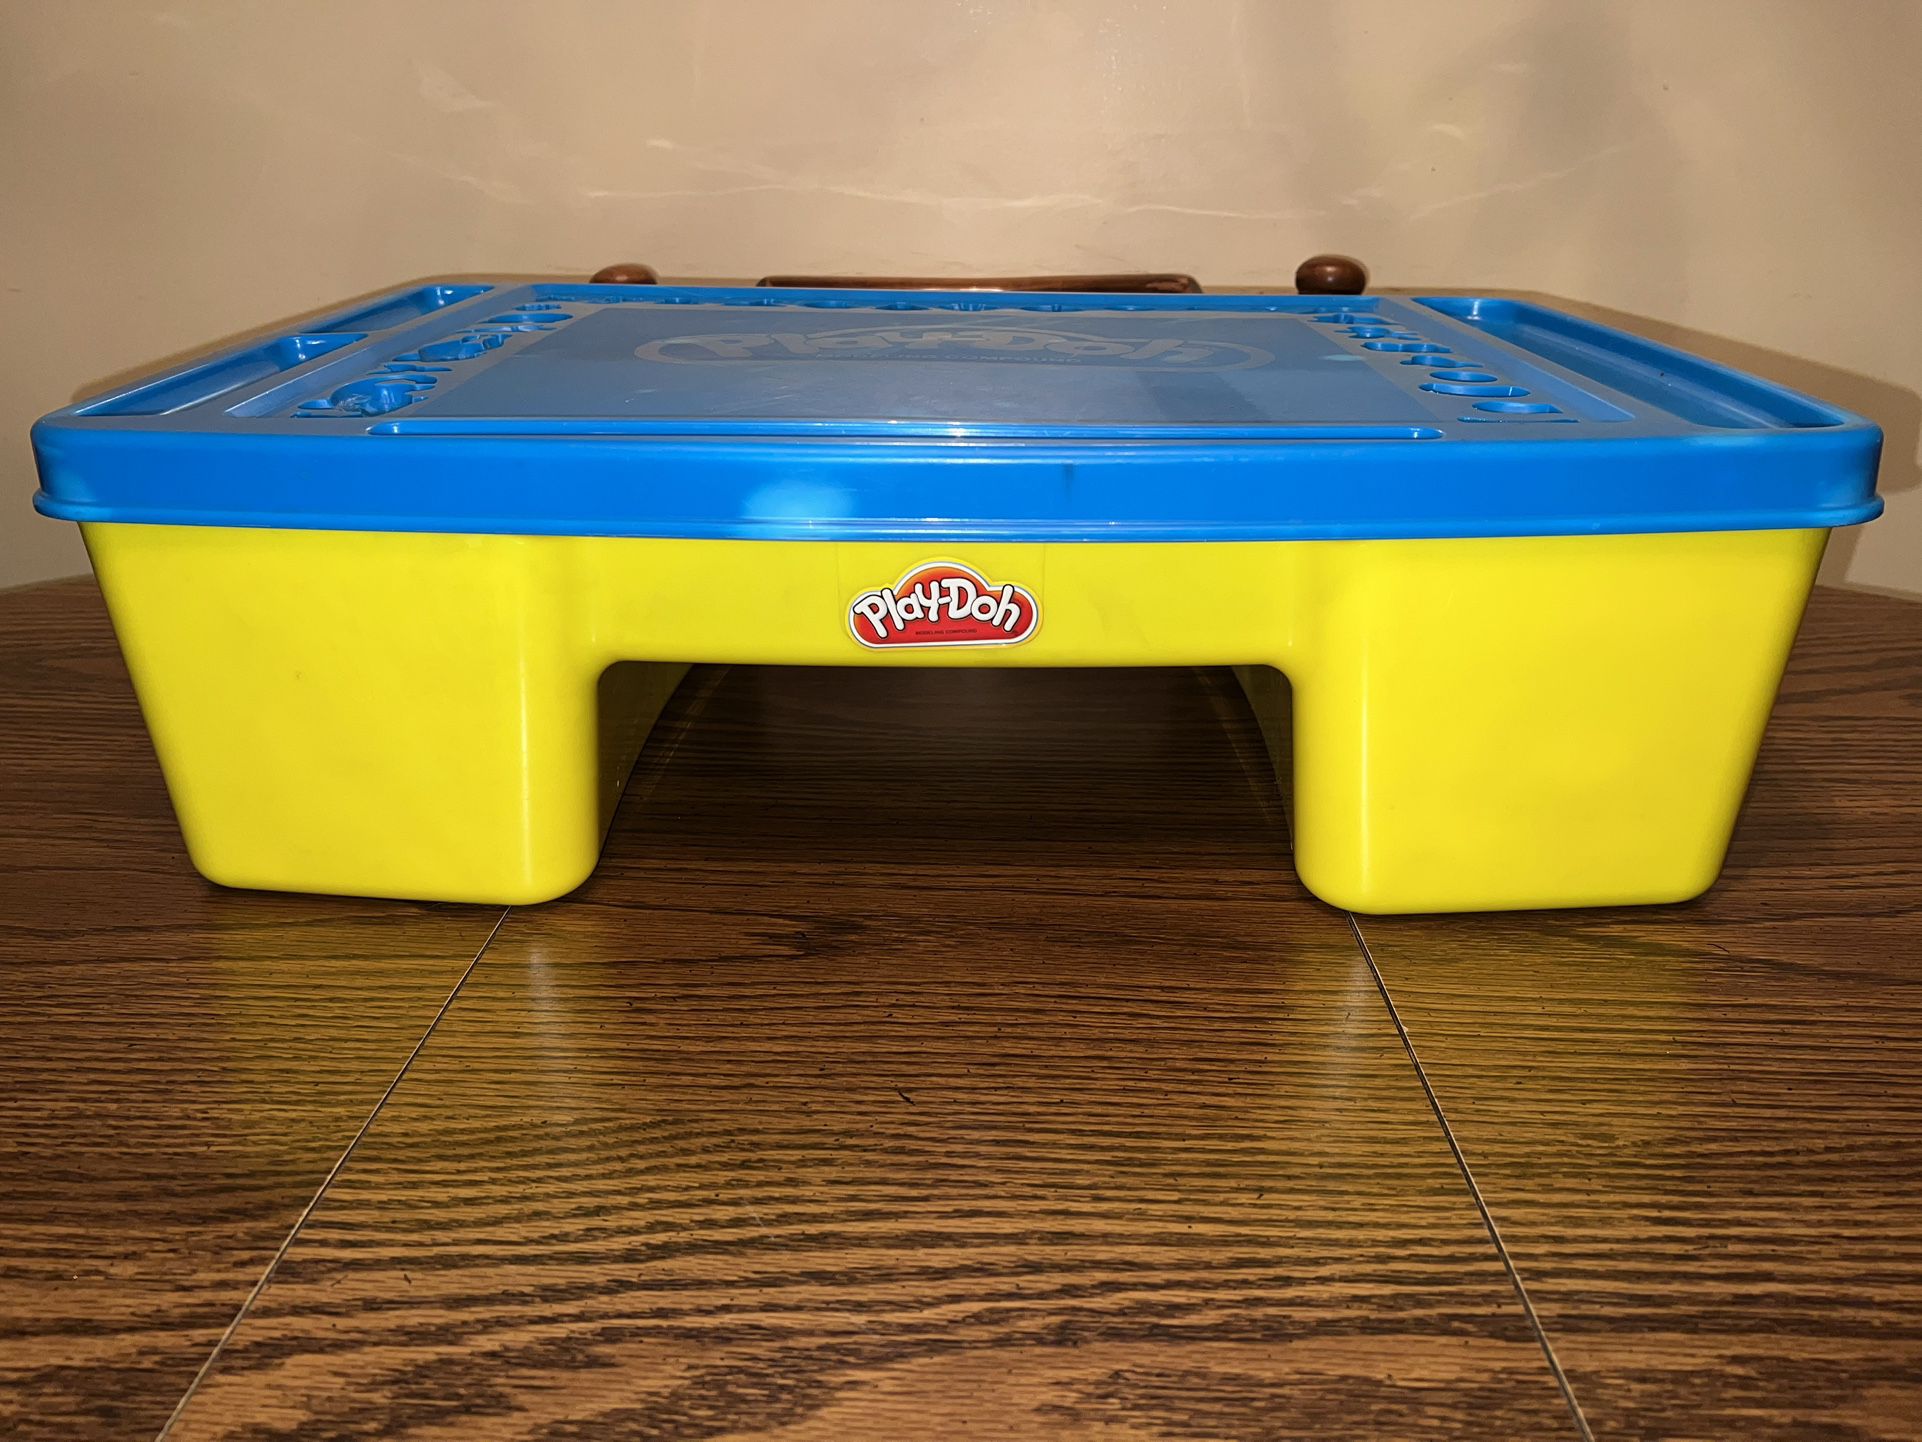 Like New Large Play-Doh Storage Bin And Accessories.